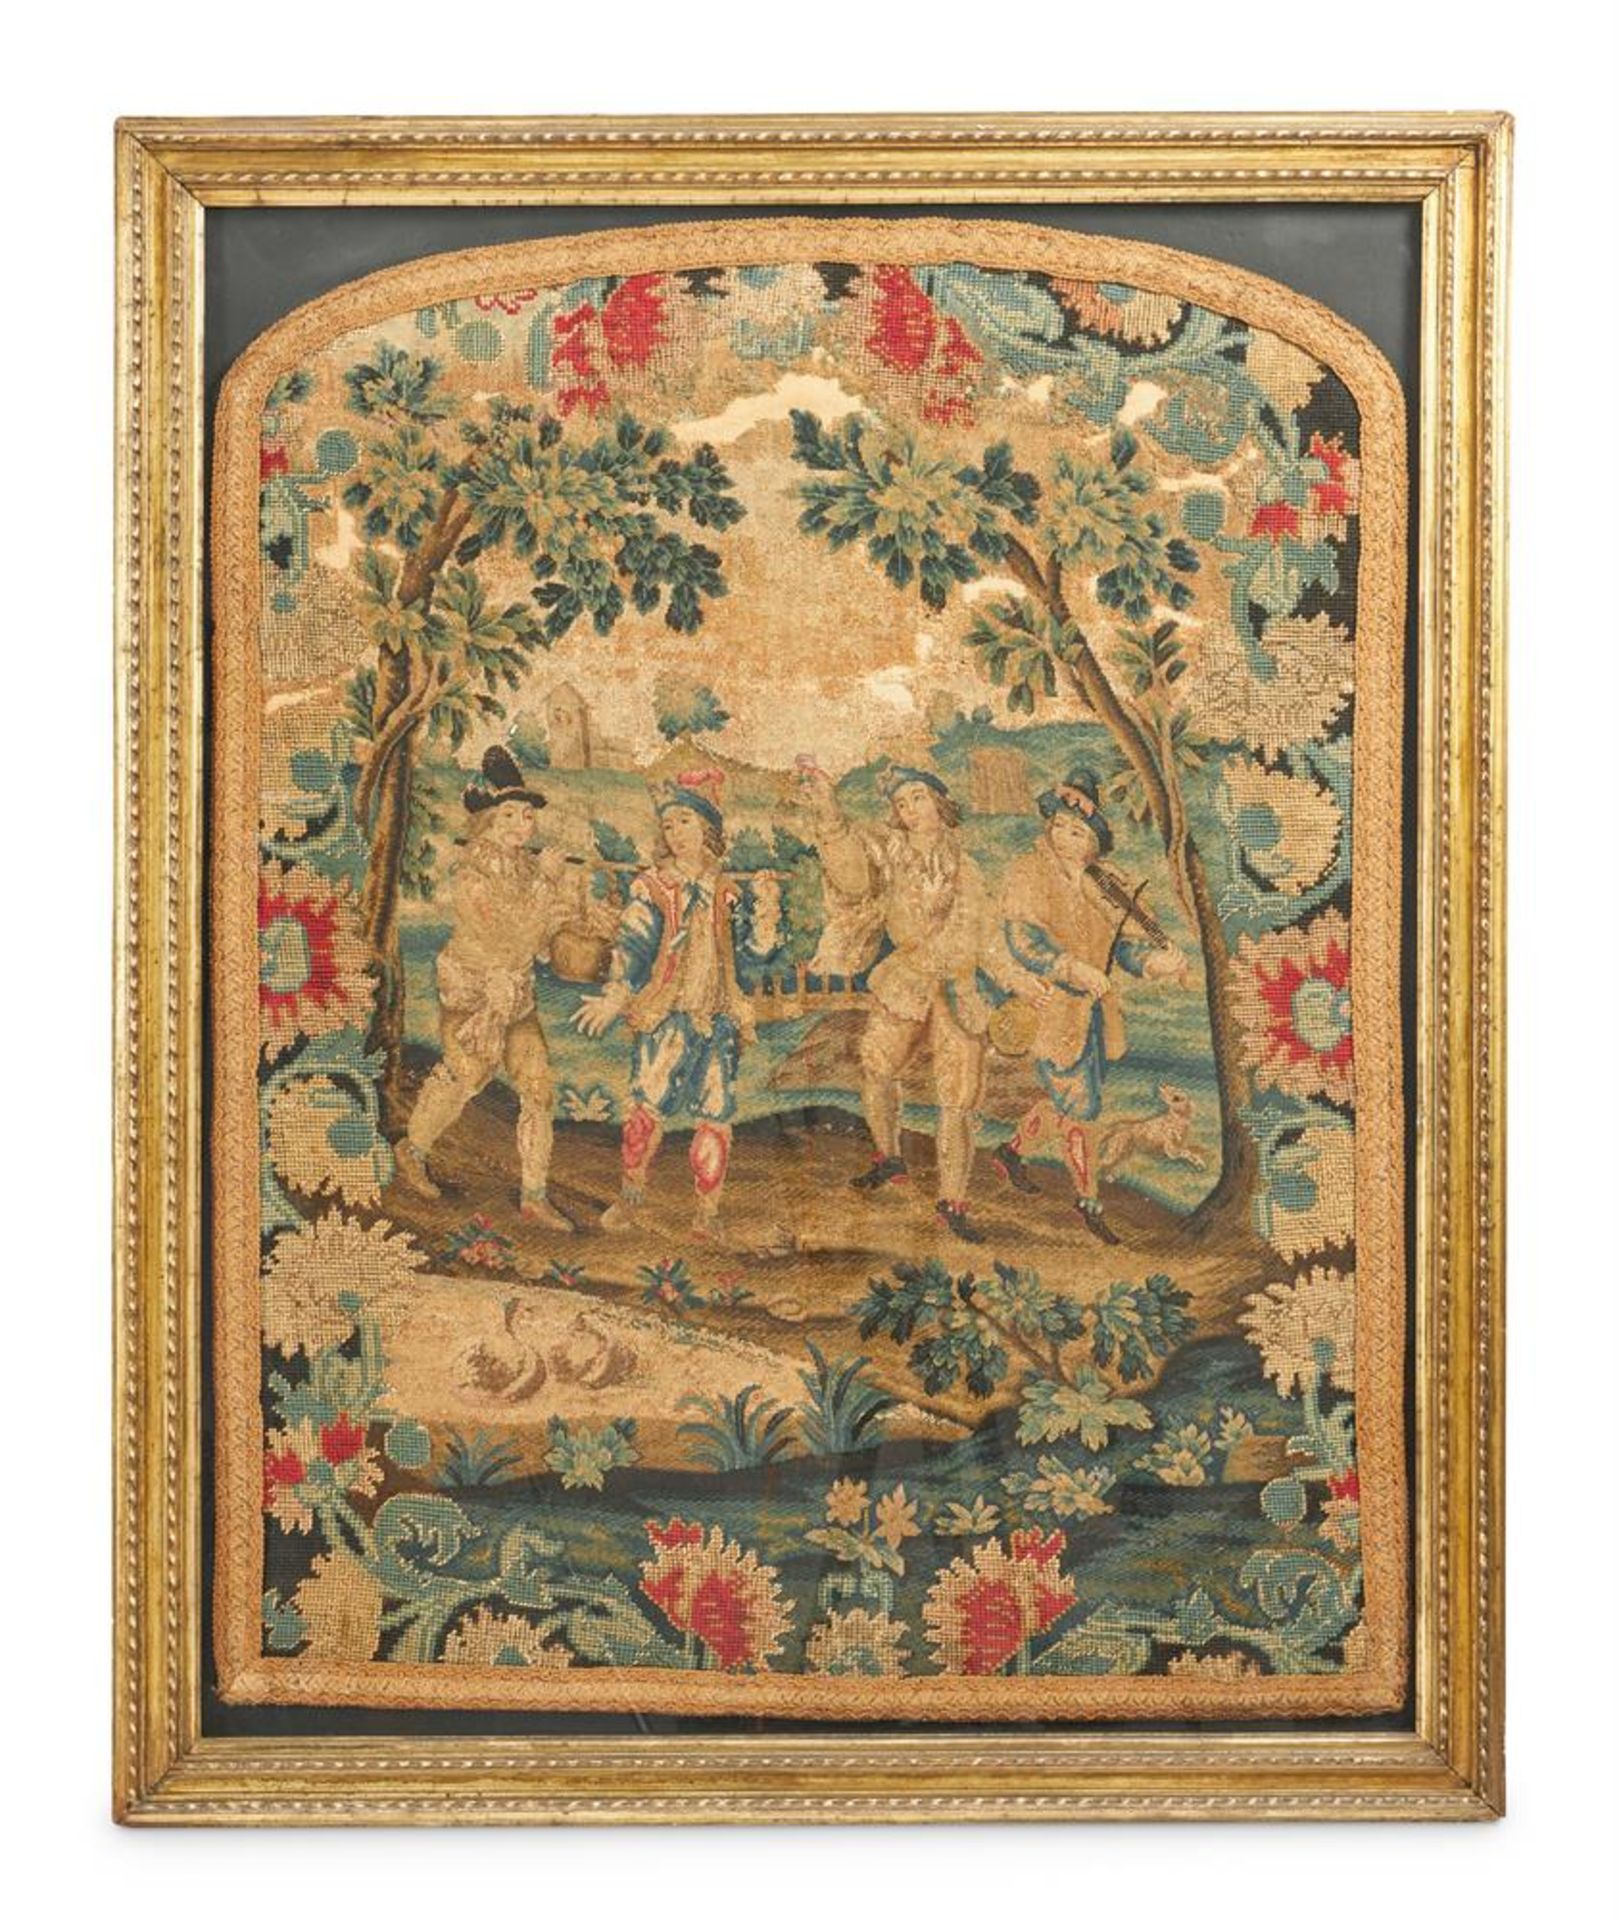 A FRAMED TAPESTRY FRAGMENT, PROBABLY LATE 17TH/EARLY 18TH CENTURY